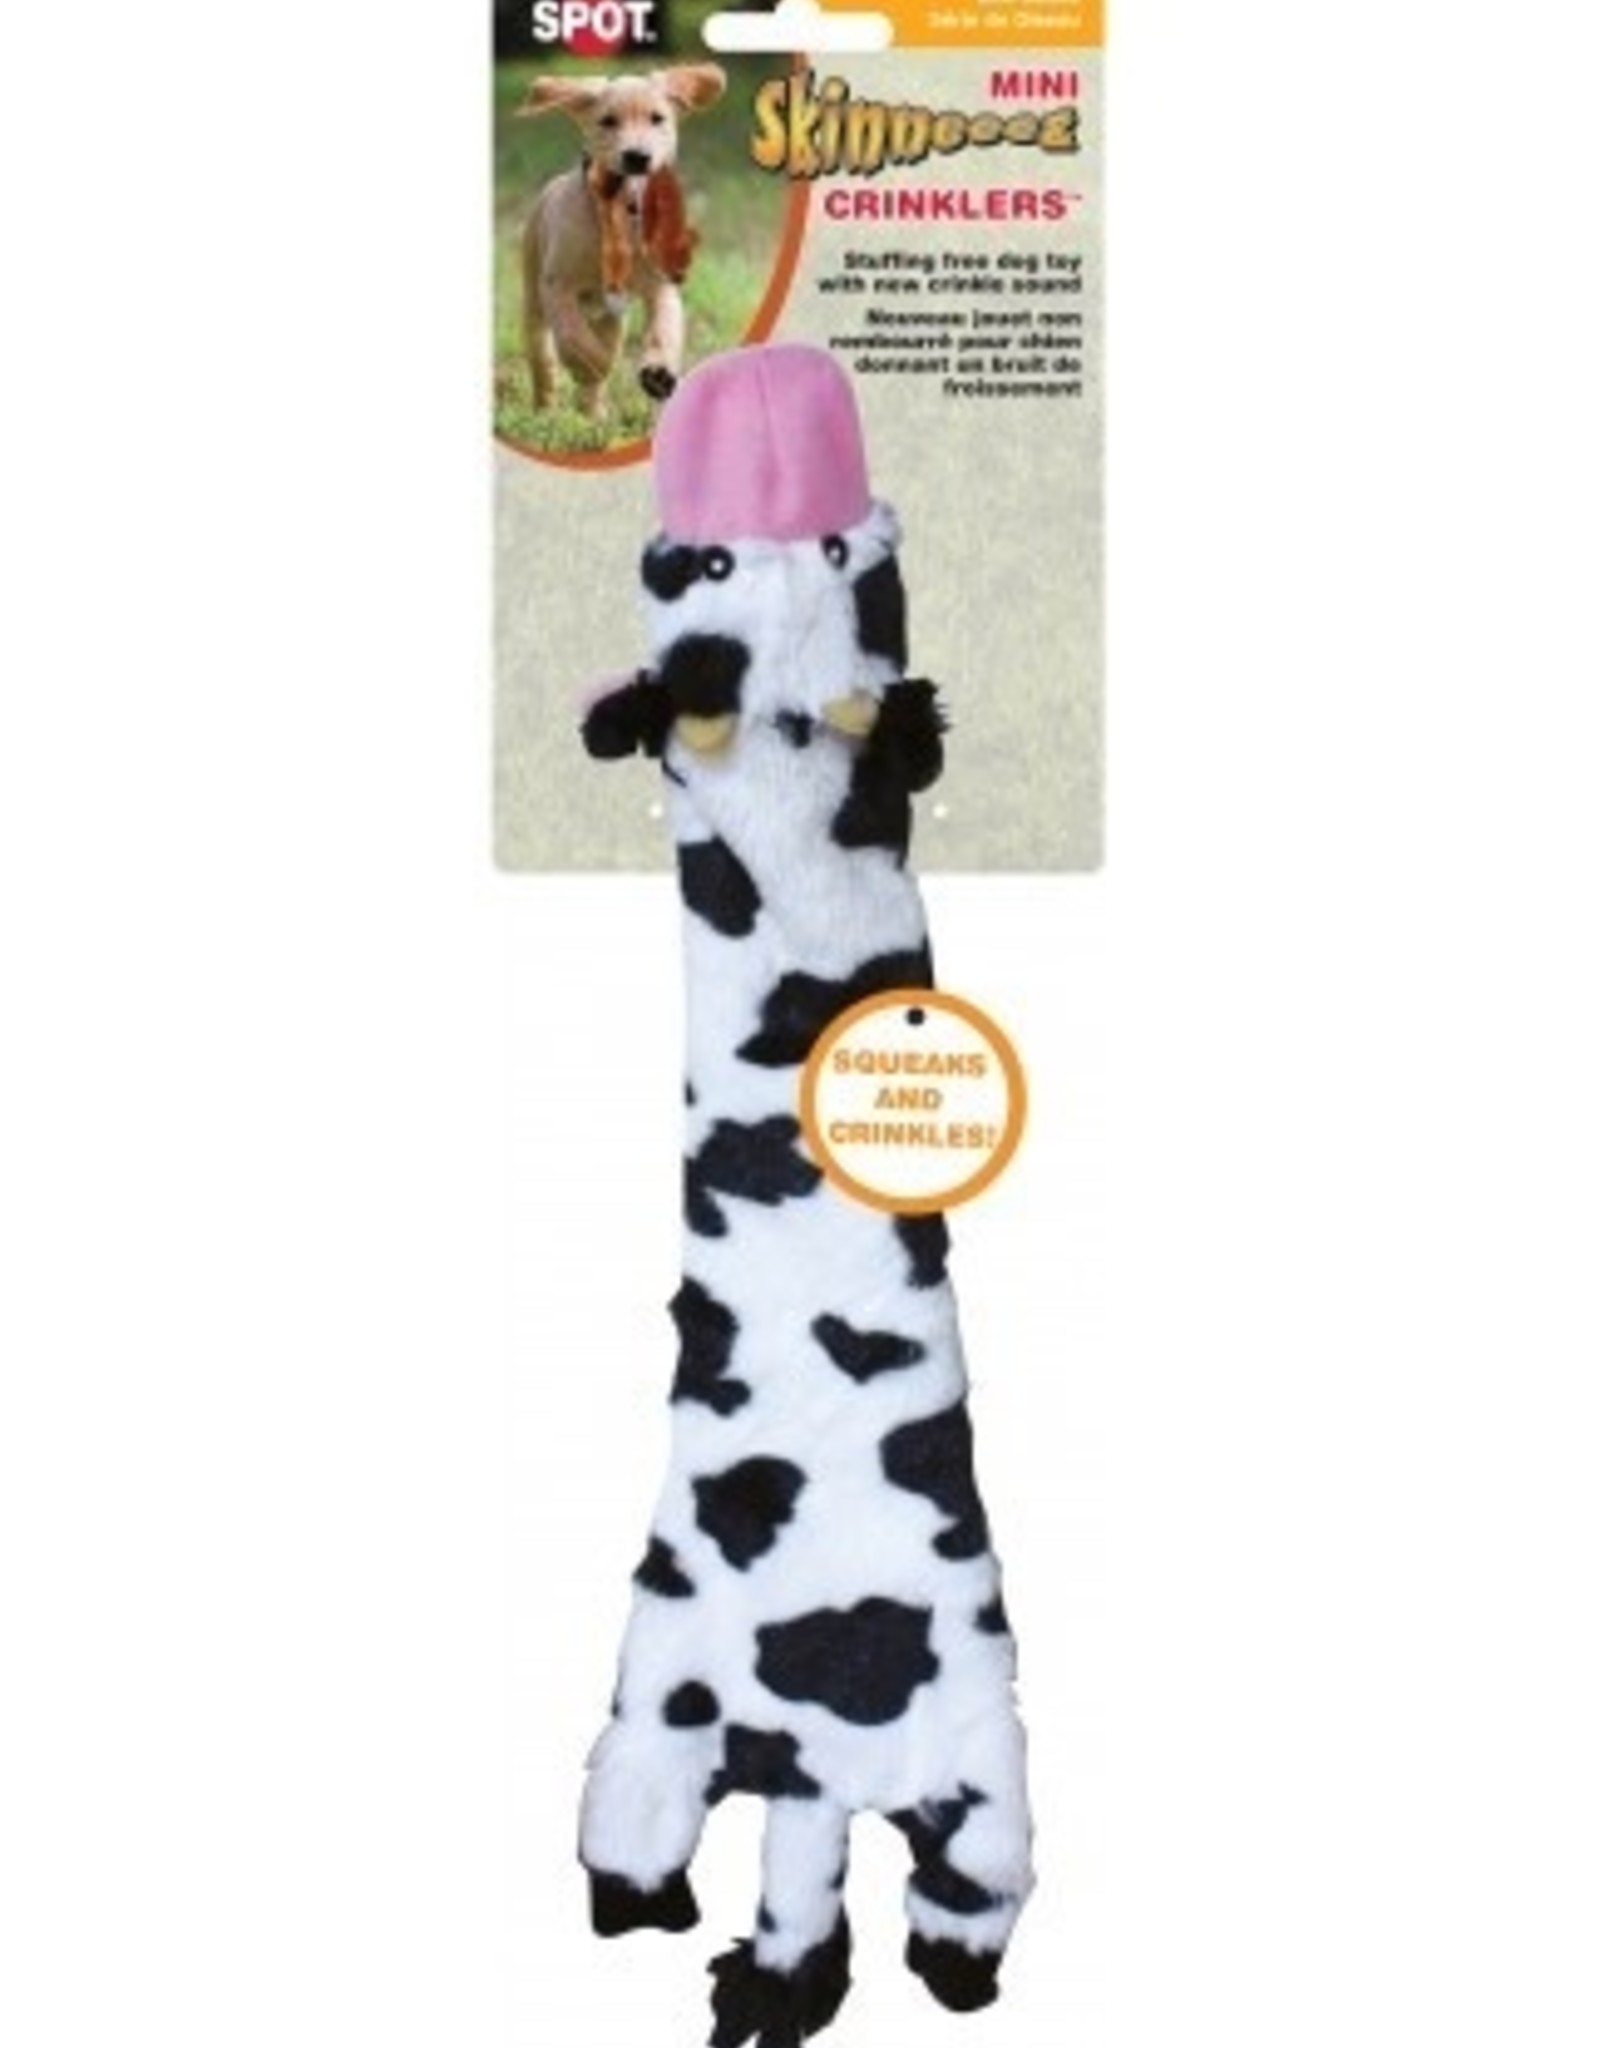 ETHICAL PRODUCTS, INC. SKINNEEEZ CRINKLER COW 14"